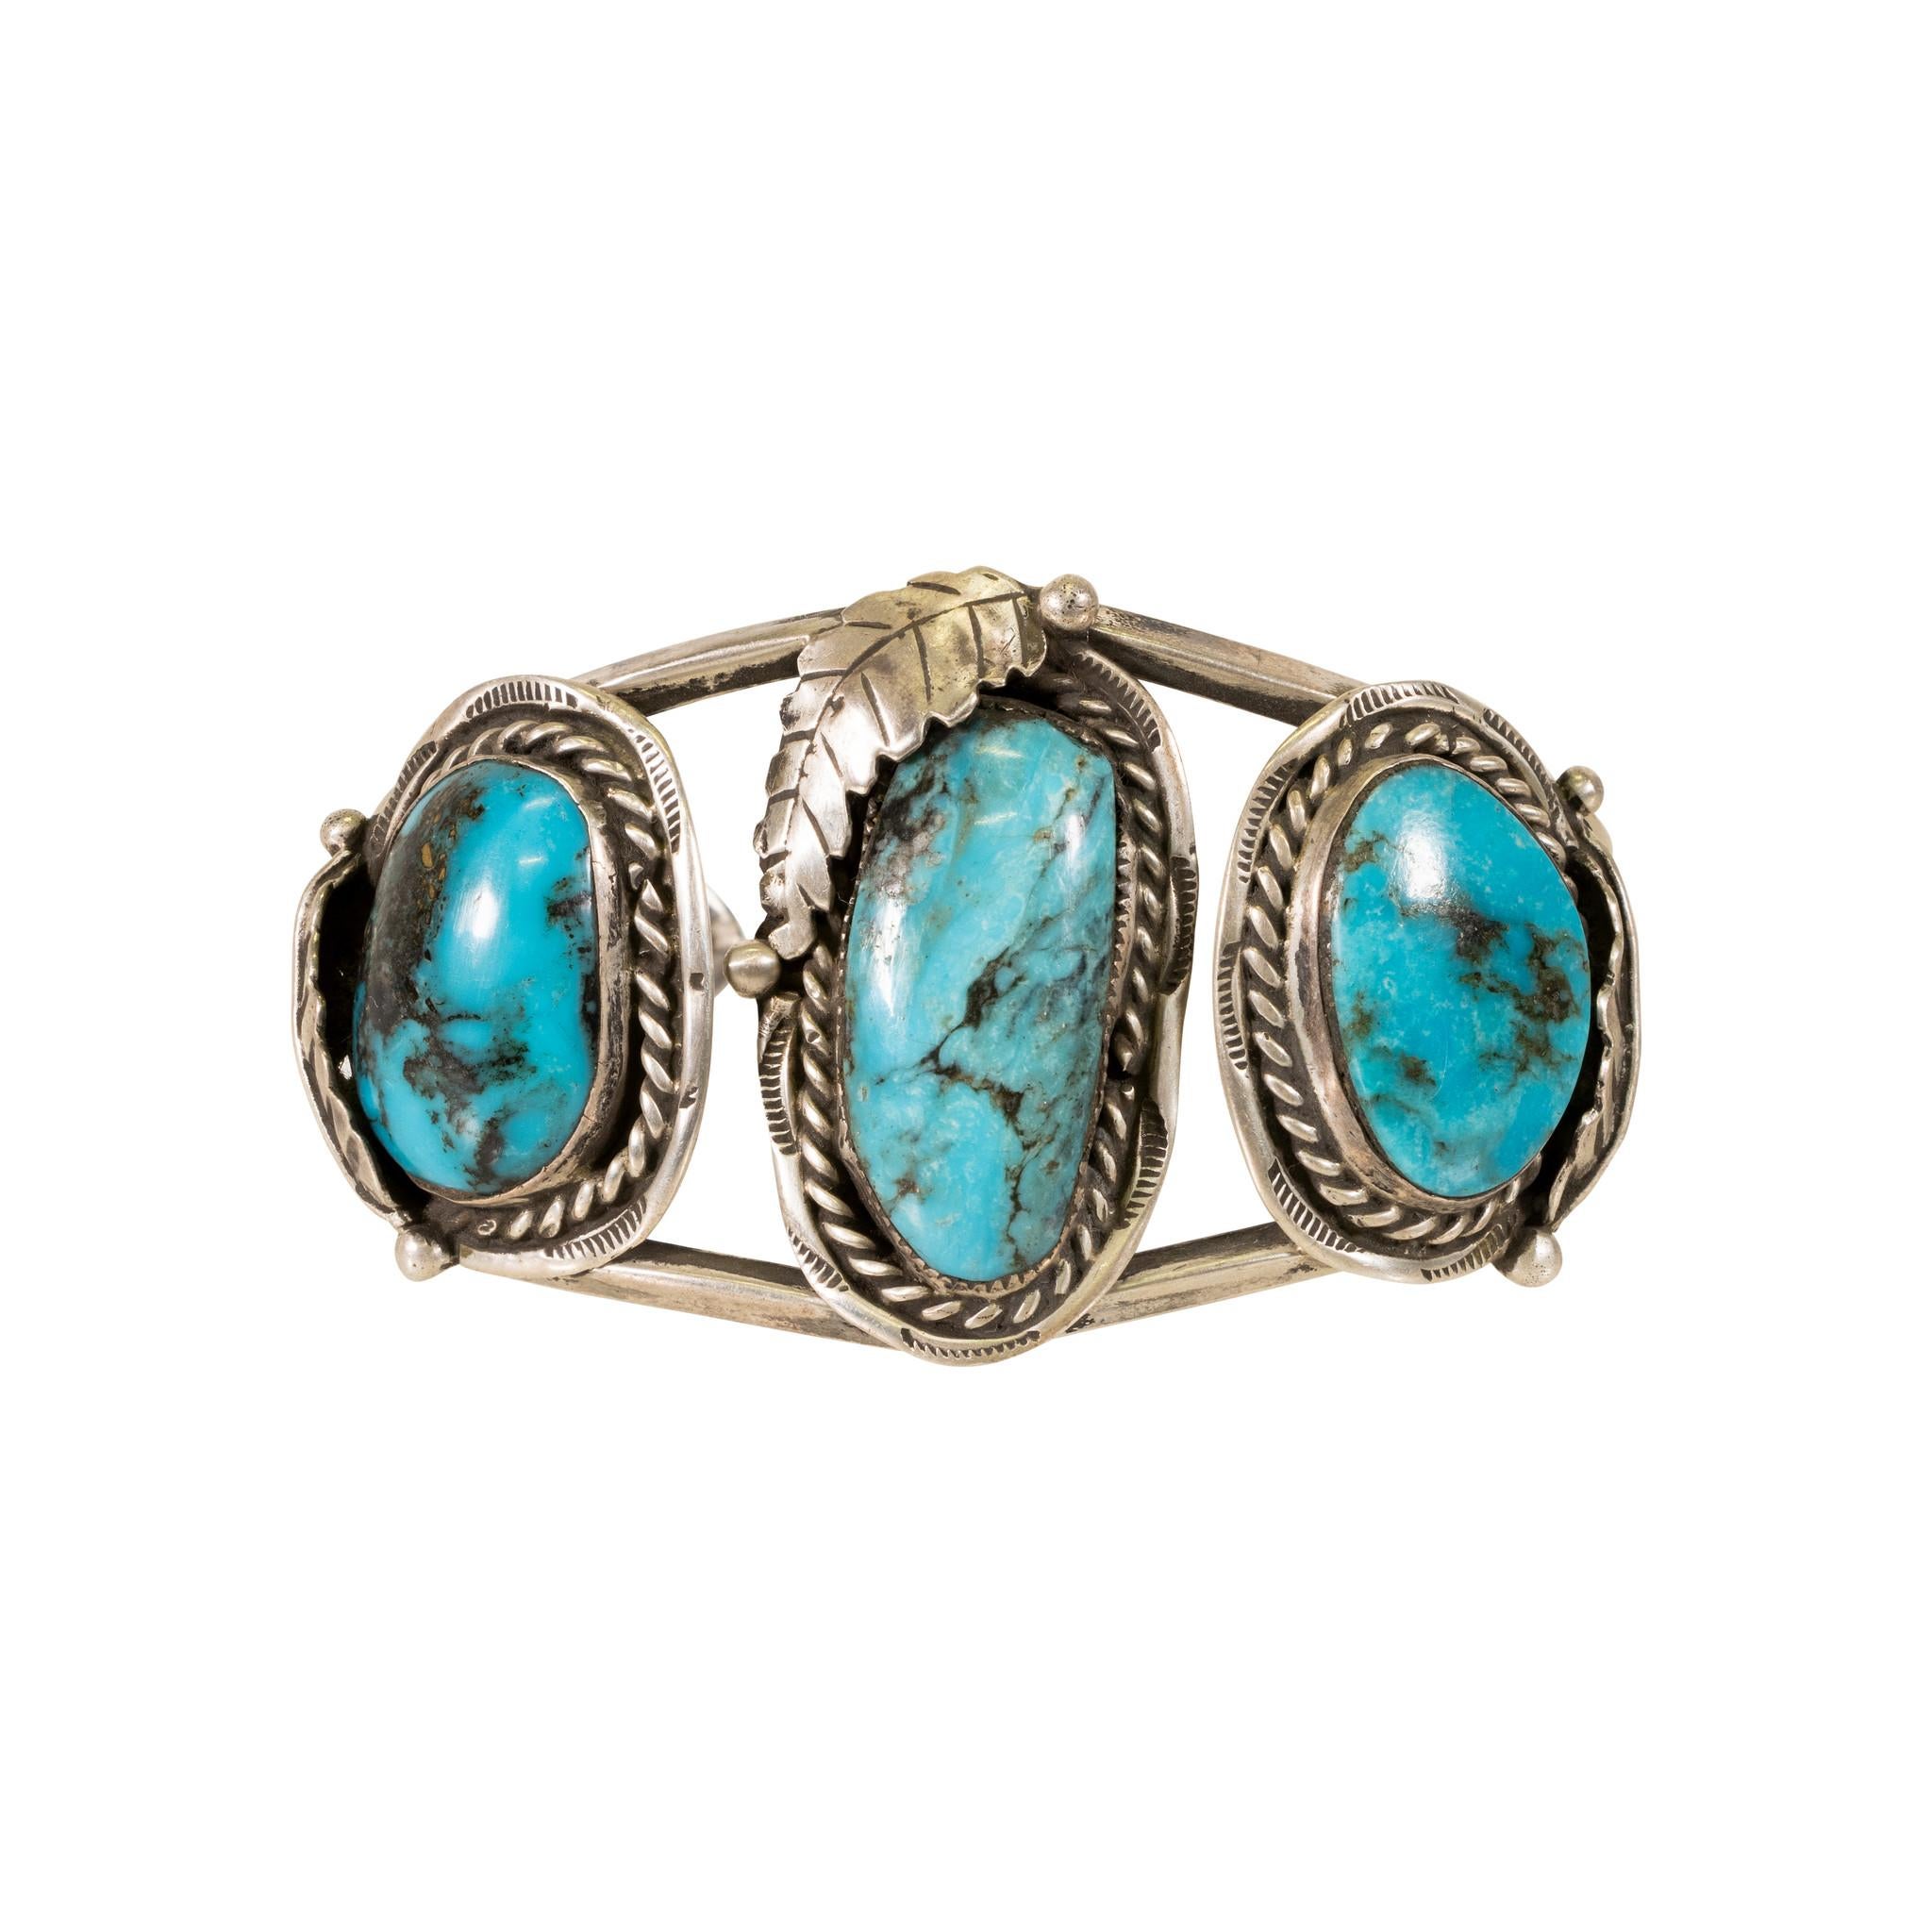 Old Mine Cut Navajo Morenci Turquoise and Sterling Bracelet